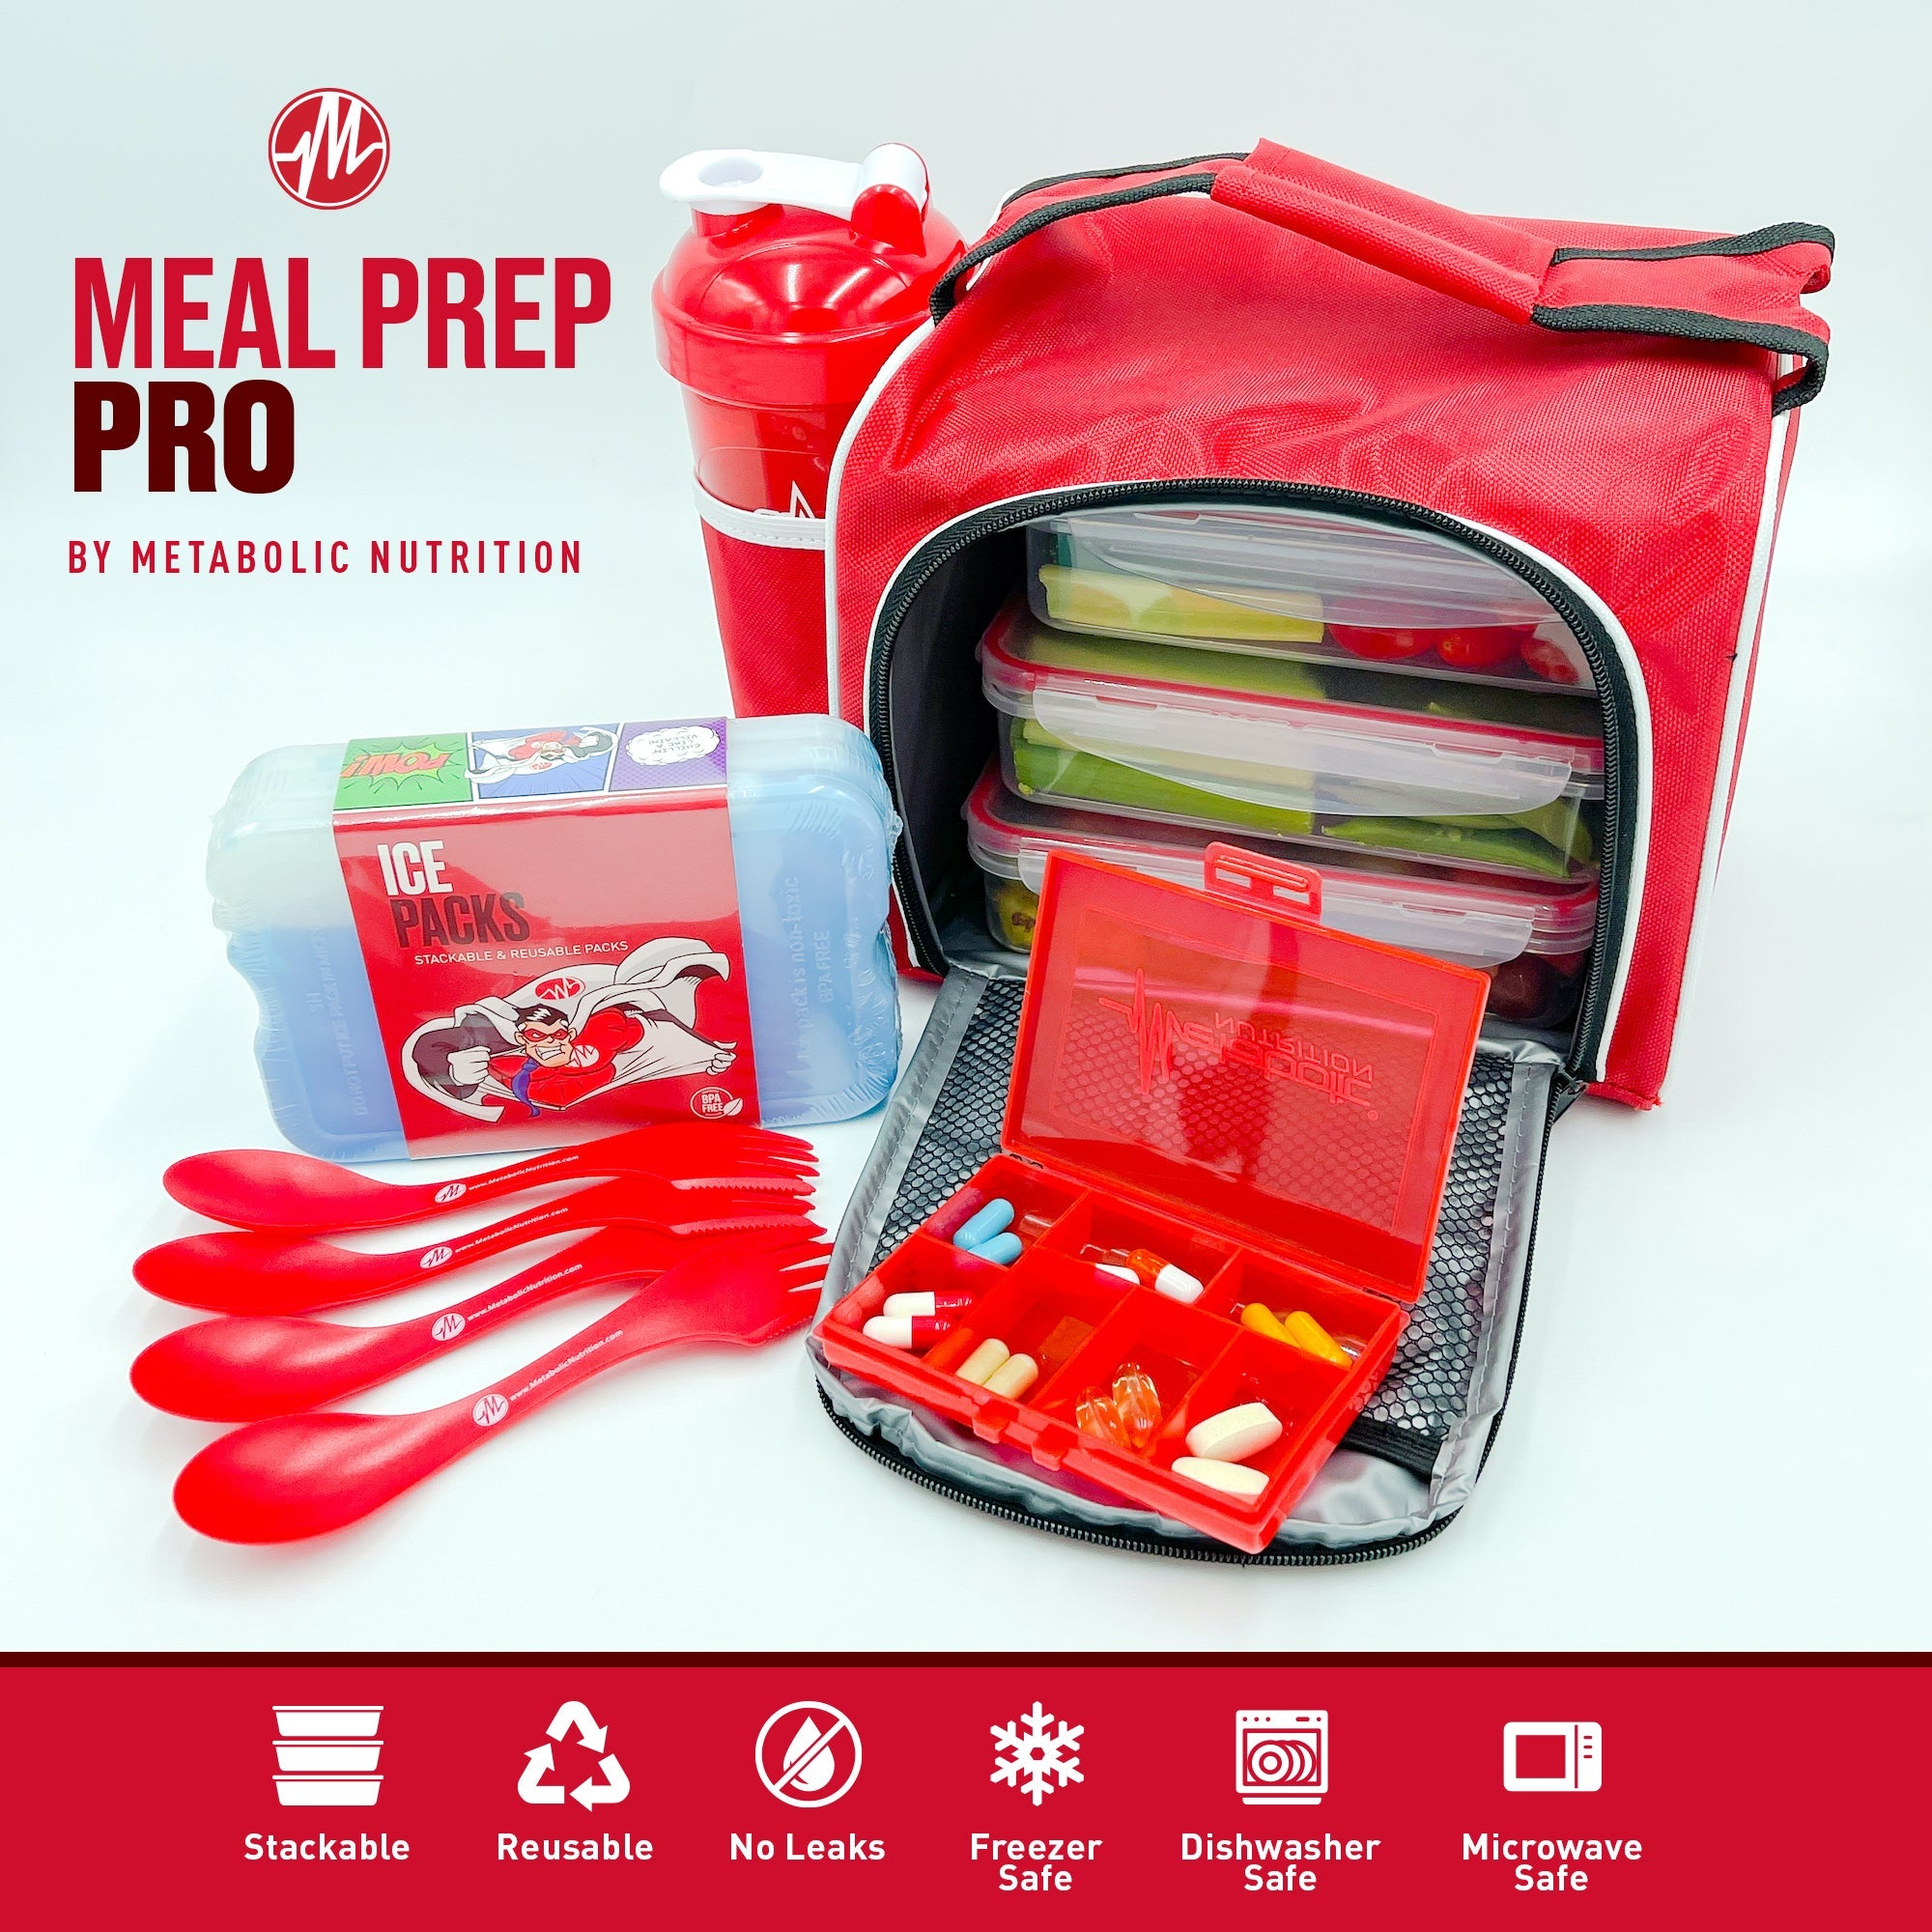 Meal Prep Products